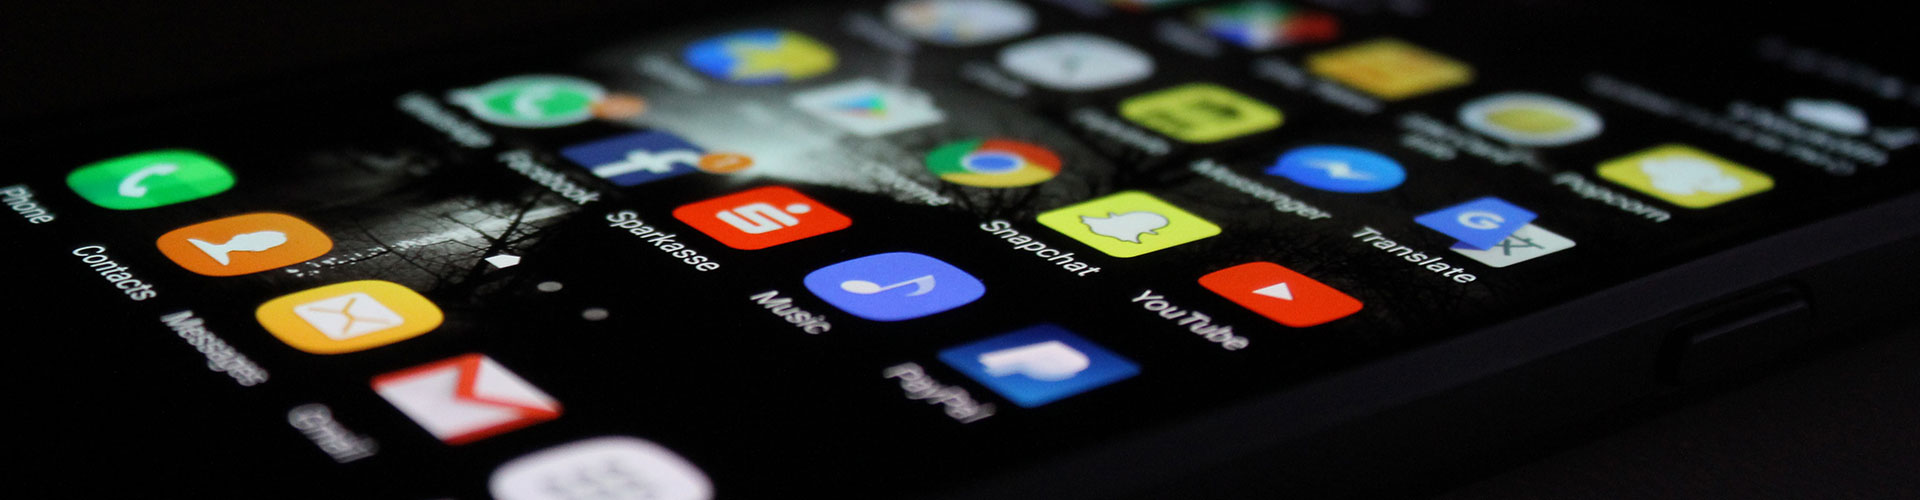 Top 10 Pitfalls To Avoid While Building Mobile Apps - What Businesses Need To Know